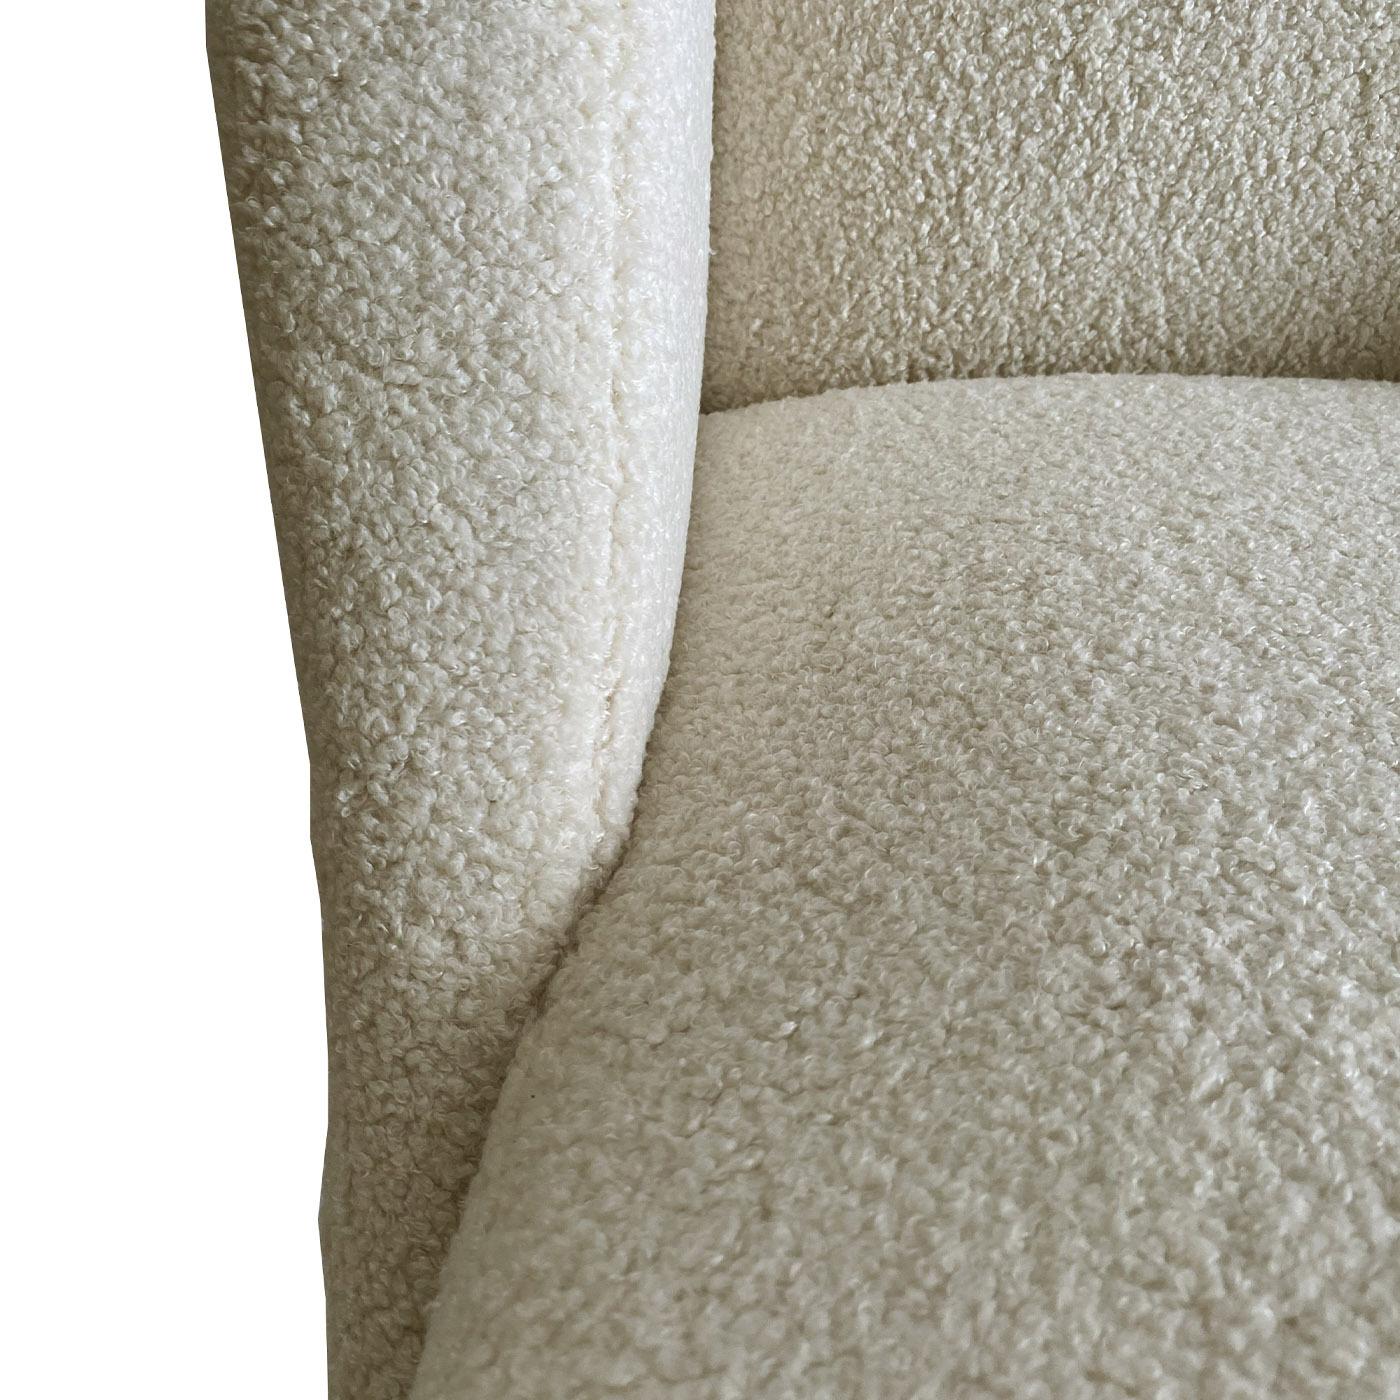 This refined '50s-style armchair is defined by generous curves forming a cozy nest to relax. Sustainability and reuse are the key principles behind its design, from energy consumption to materials, including the soft and luminous fabric upholstery